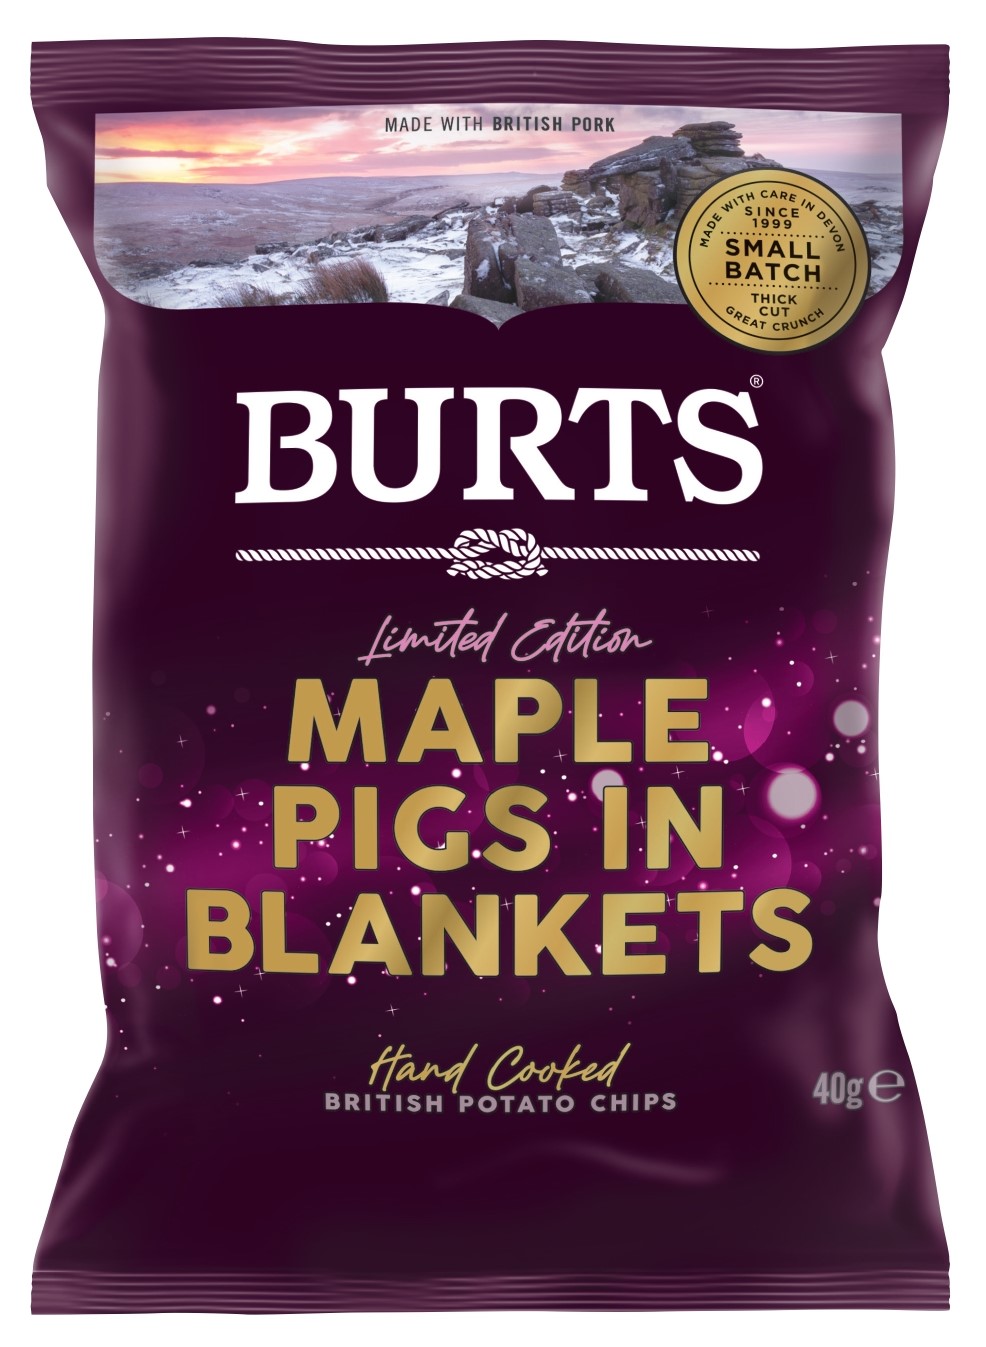 BURT'S MAPLE PIGS IN BLANKET 20 x 40G LIMITED EDITION